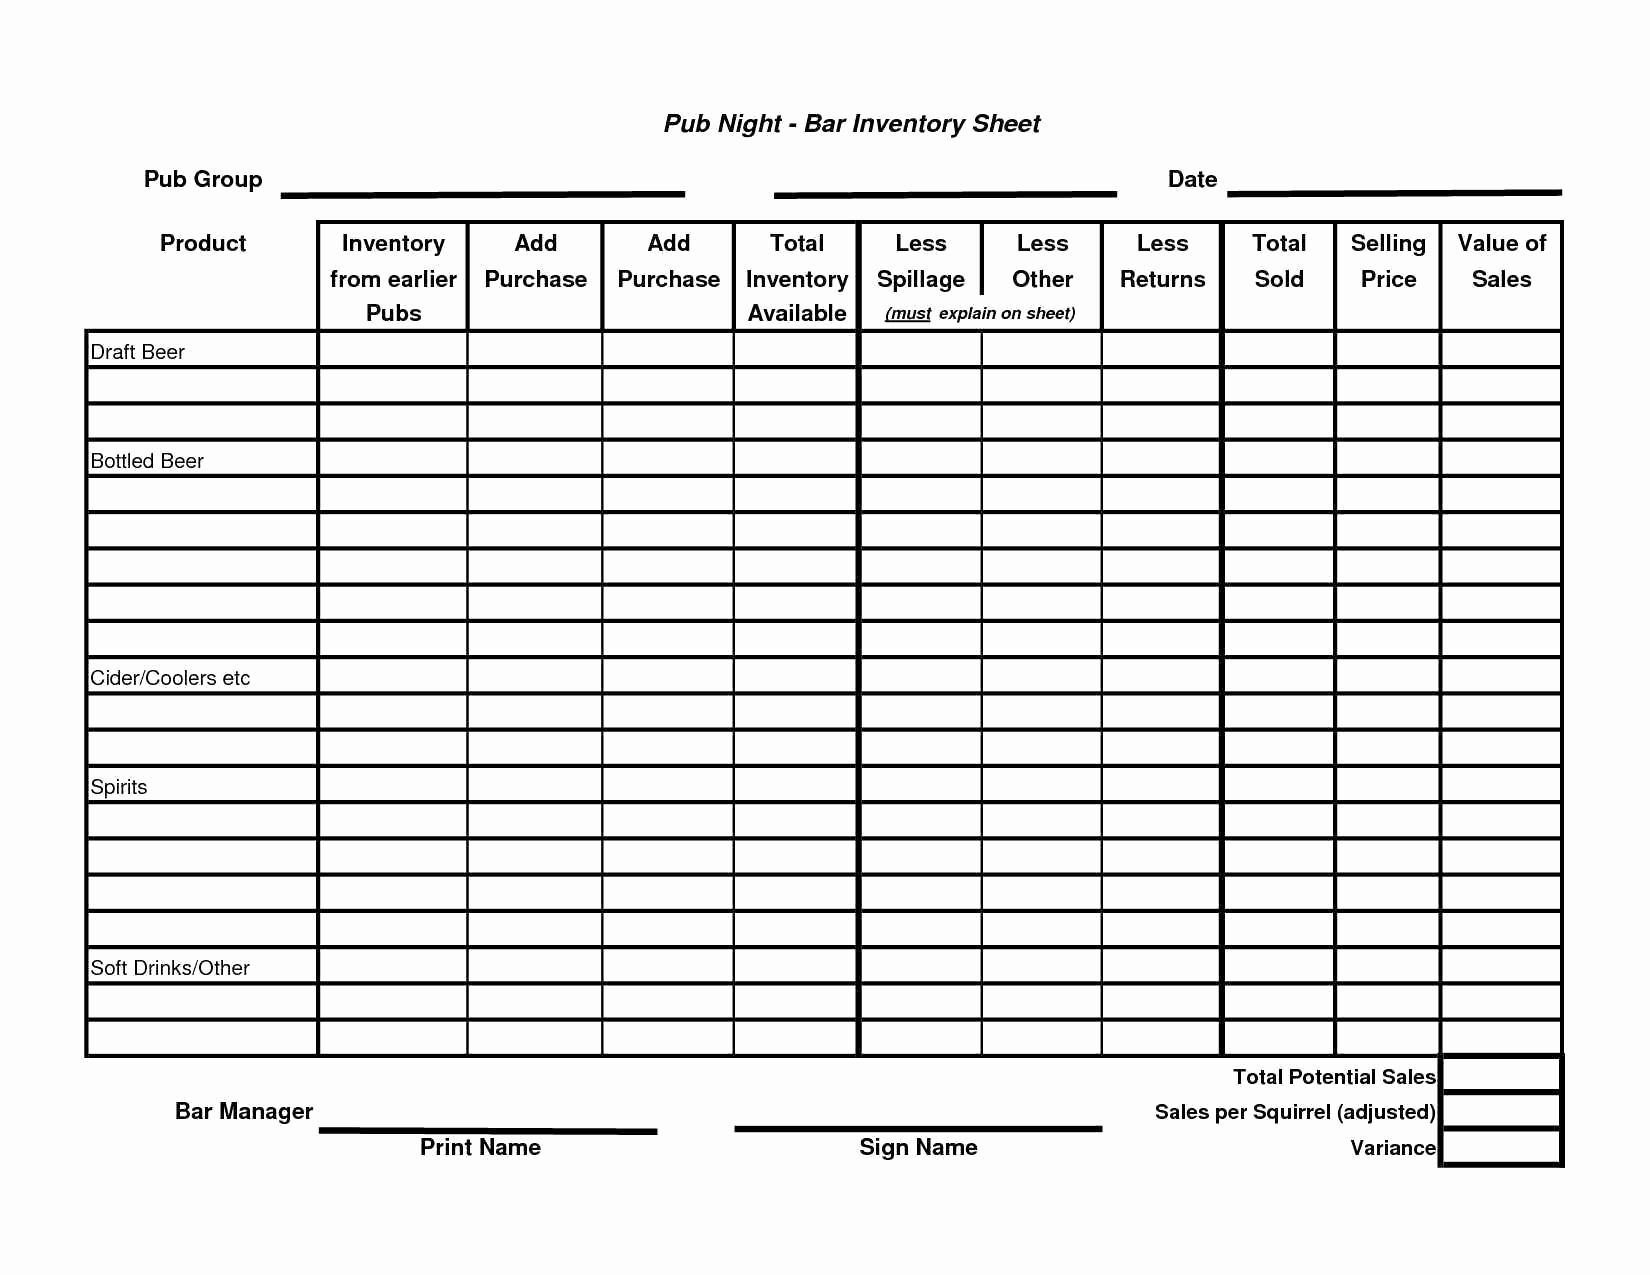 Free Liquor Inventory Spreadsheet Template Excel inside Bar I Free Liquor Inventory Spreadsheet Instructions Youtube